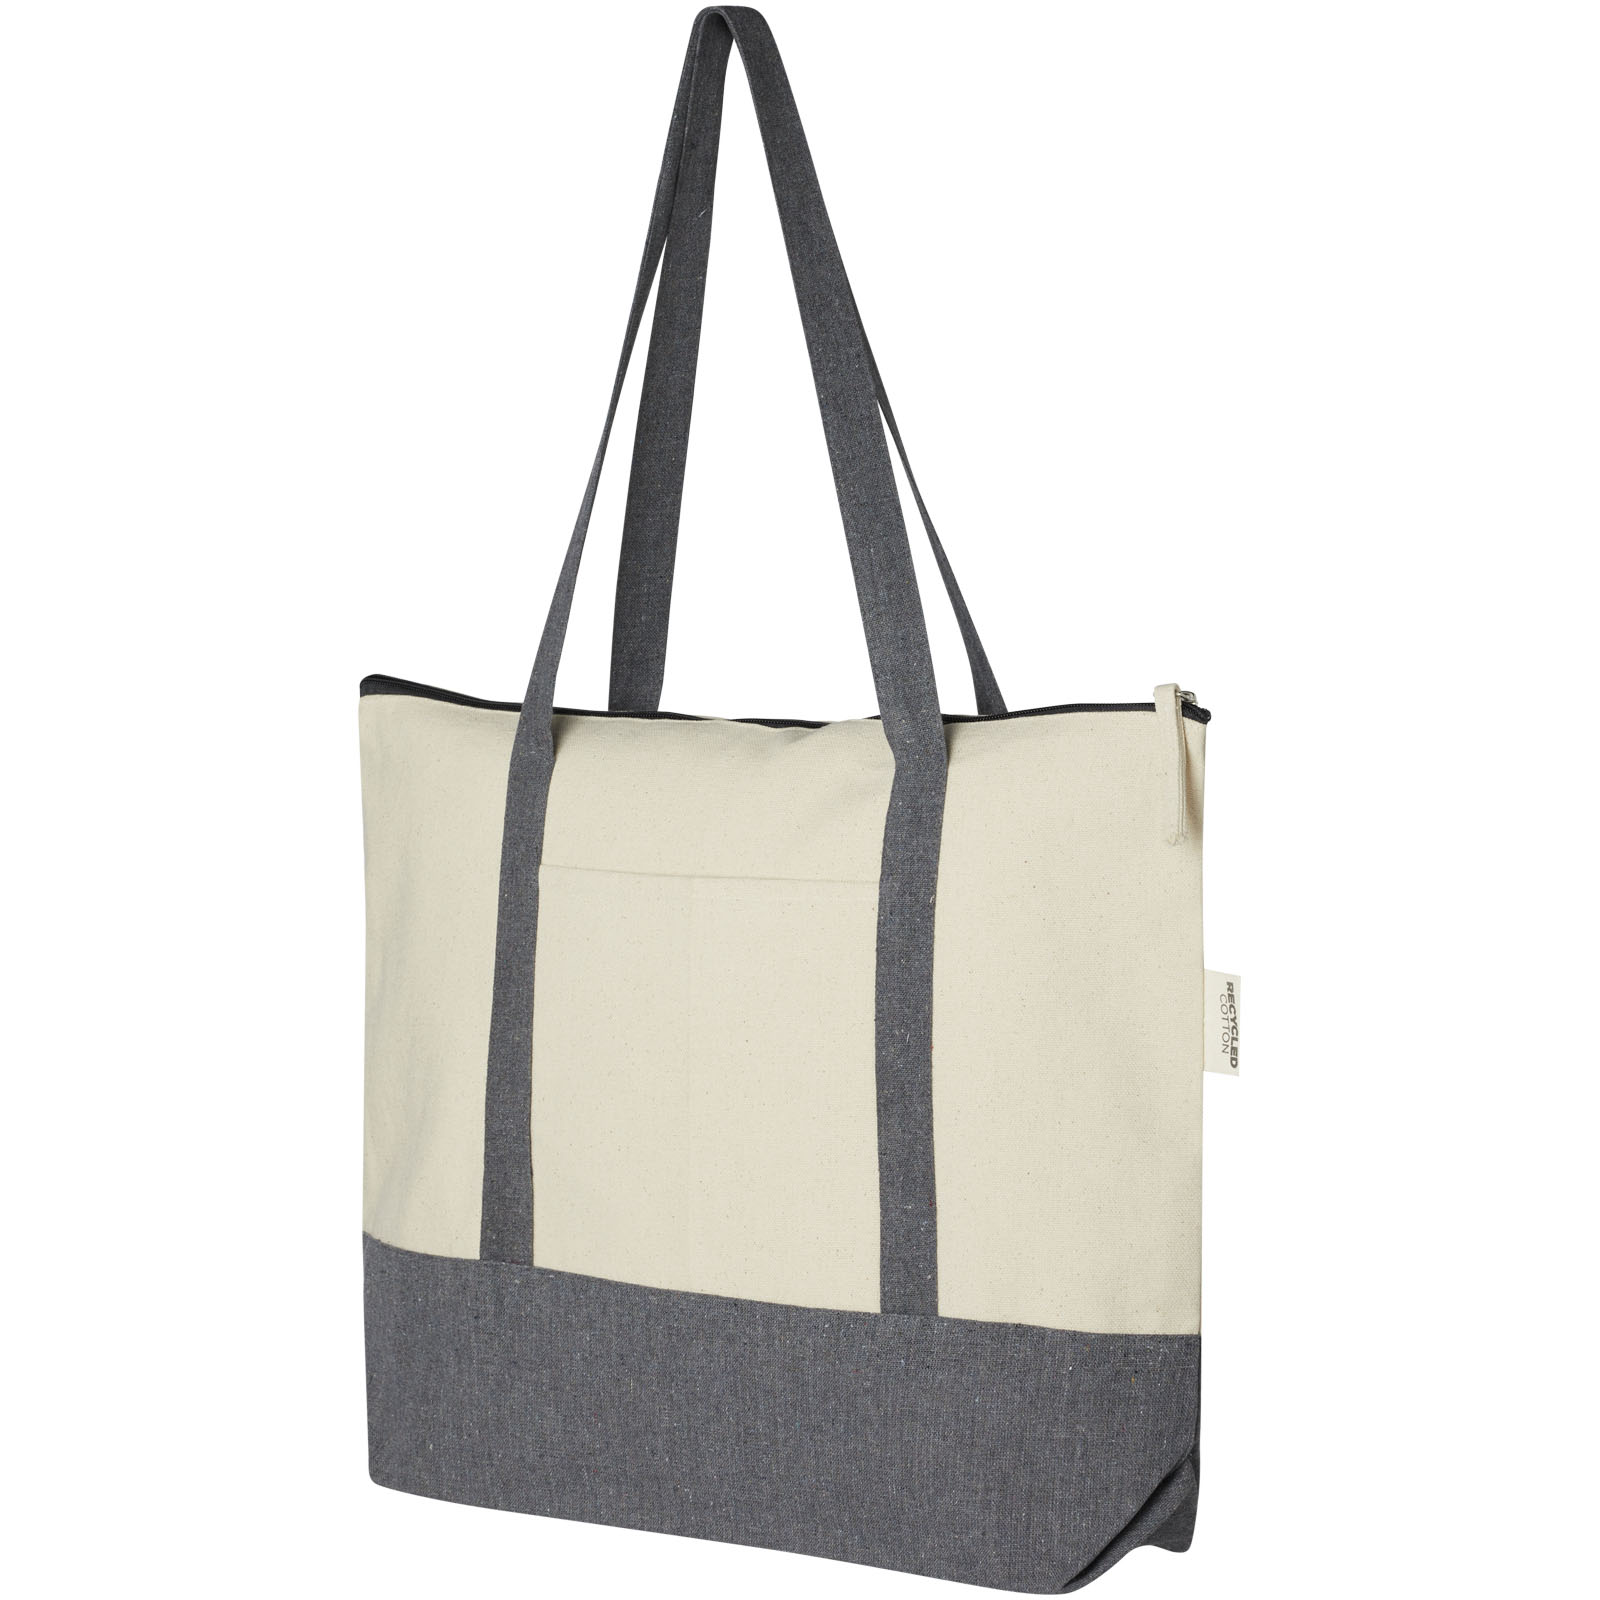 Shopping & Tote Bags - Repose 320 g/m² recycled cotton zippered tote bag 10L